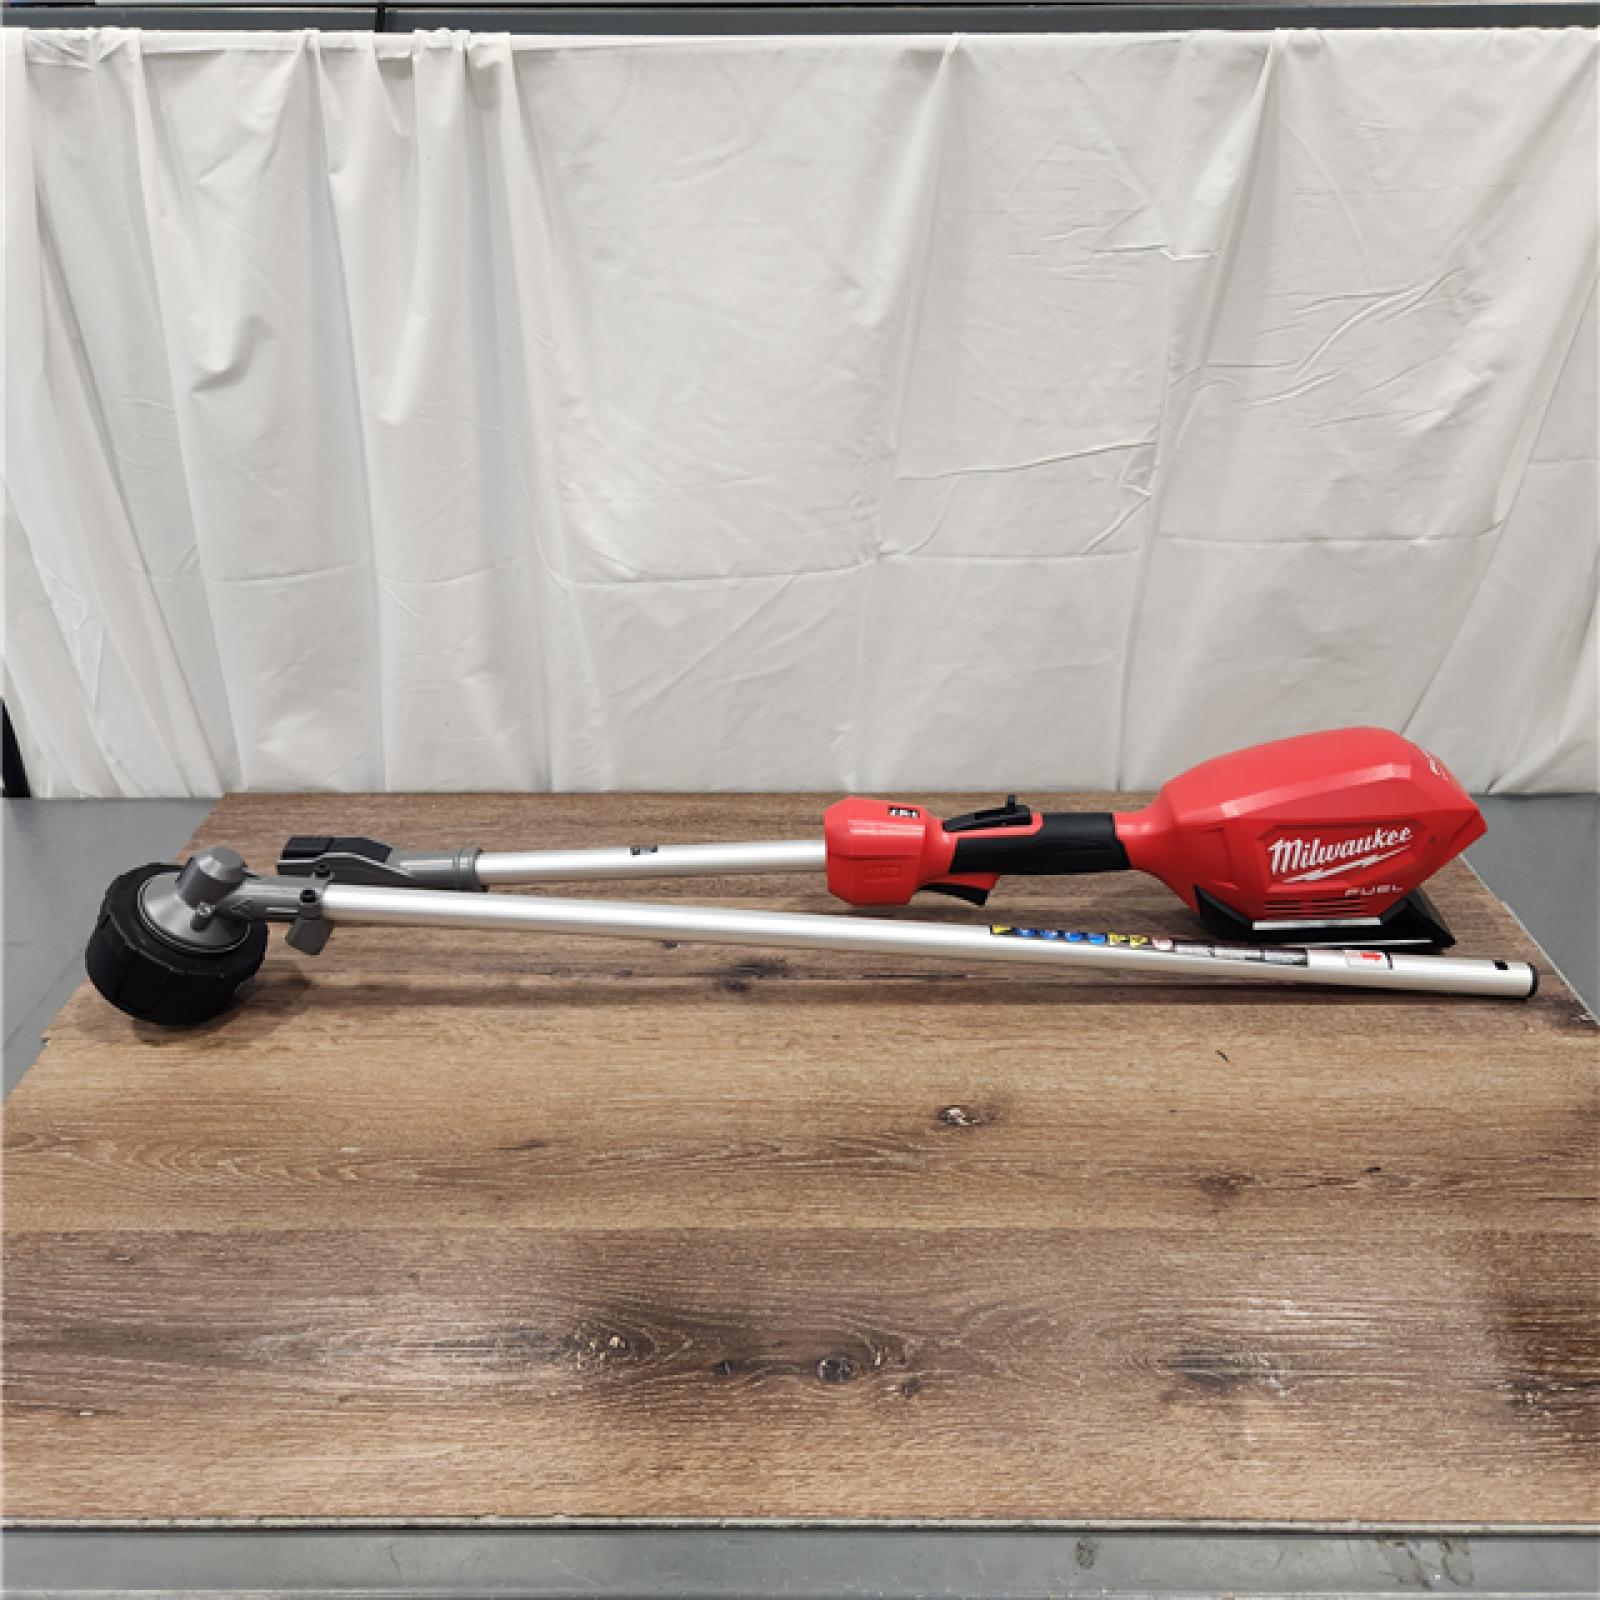 AS-IS M18 FUEL 18V Lithium-Ion Brushless Cordless String Trimmer with QUIK-LOK Attachment Capability and 8.0 Ah Battery